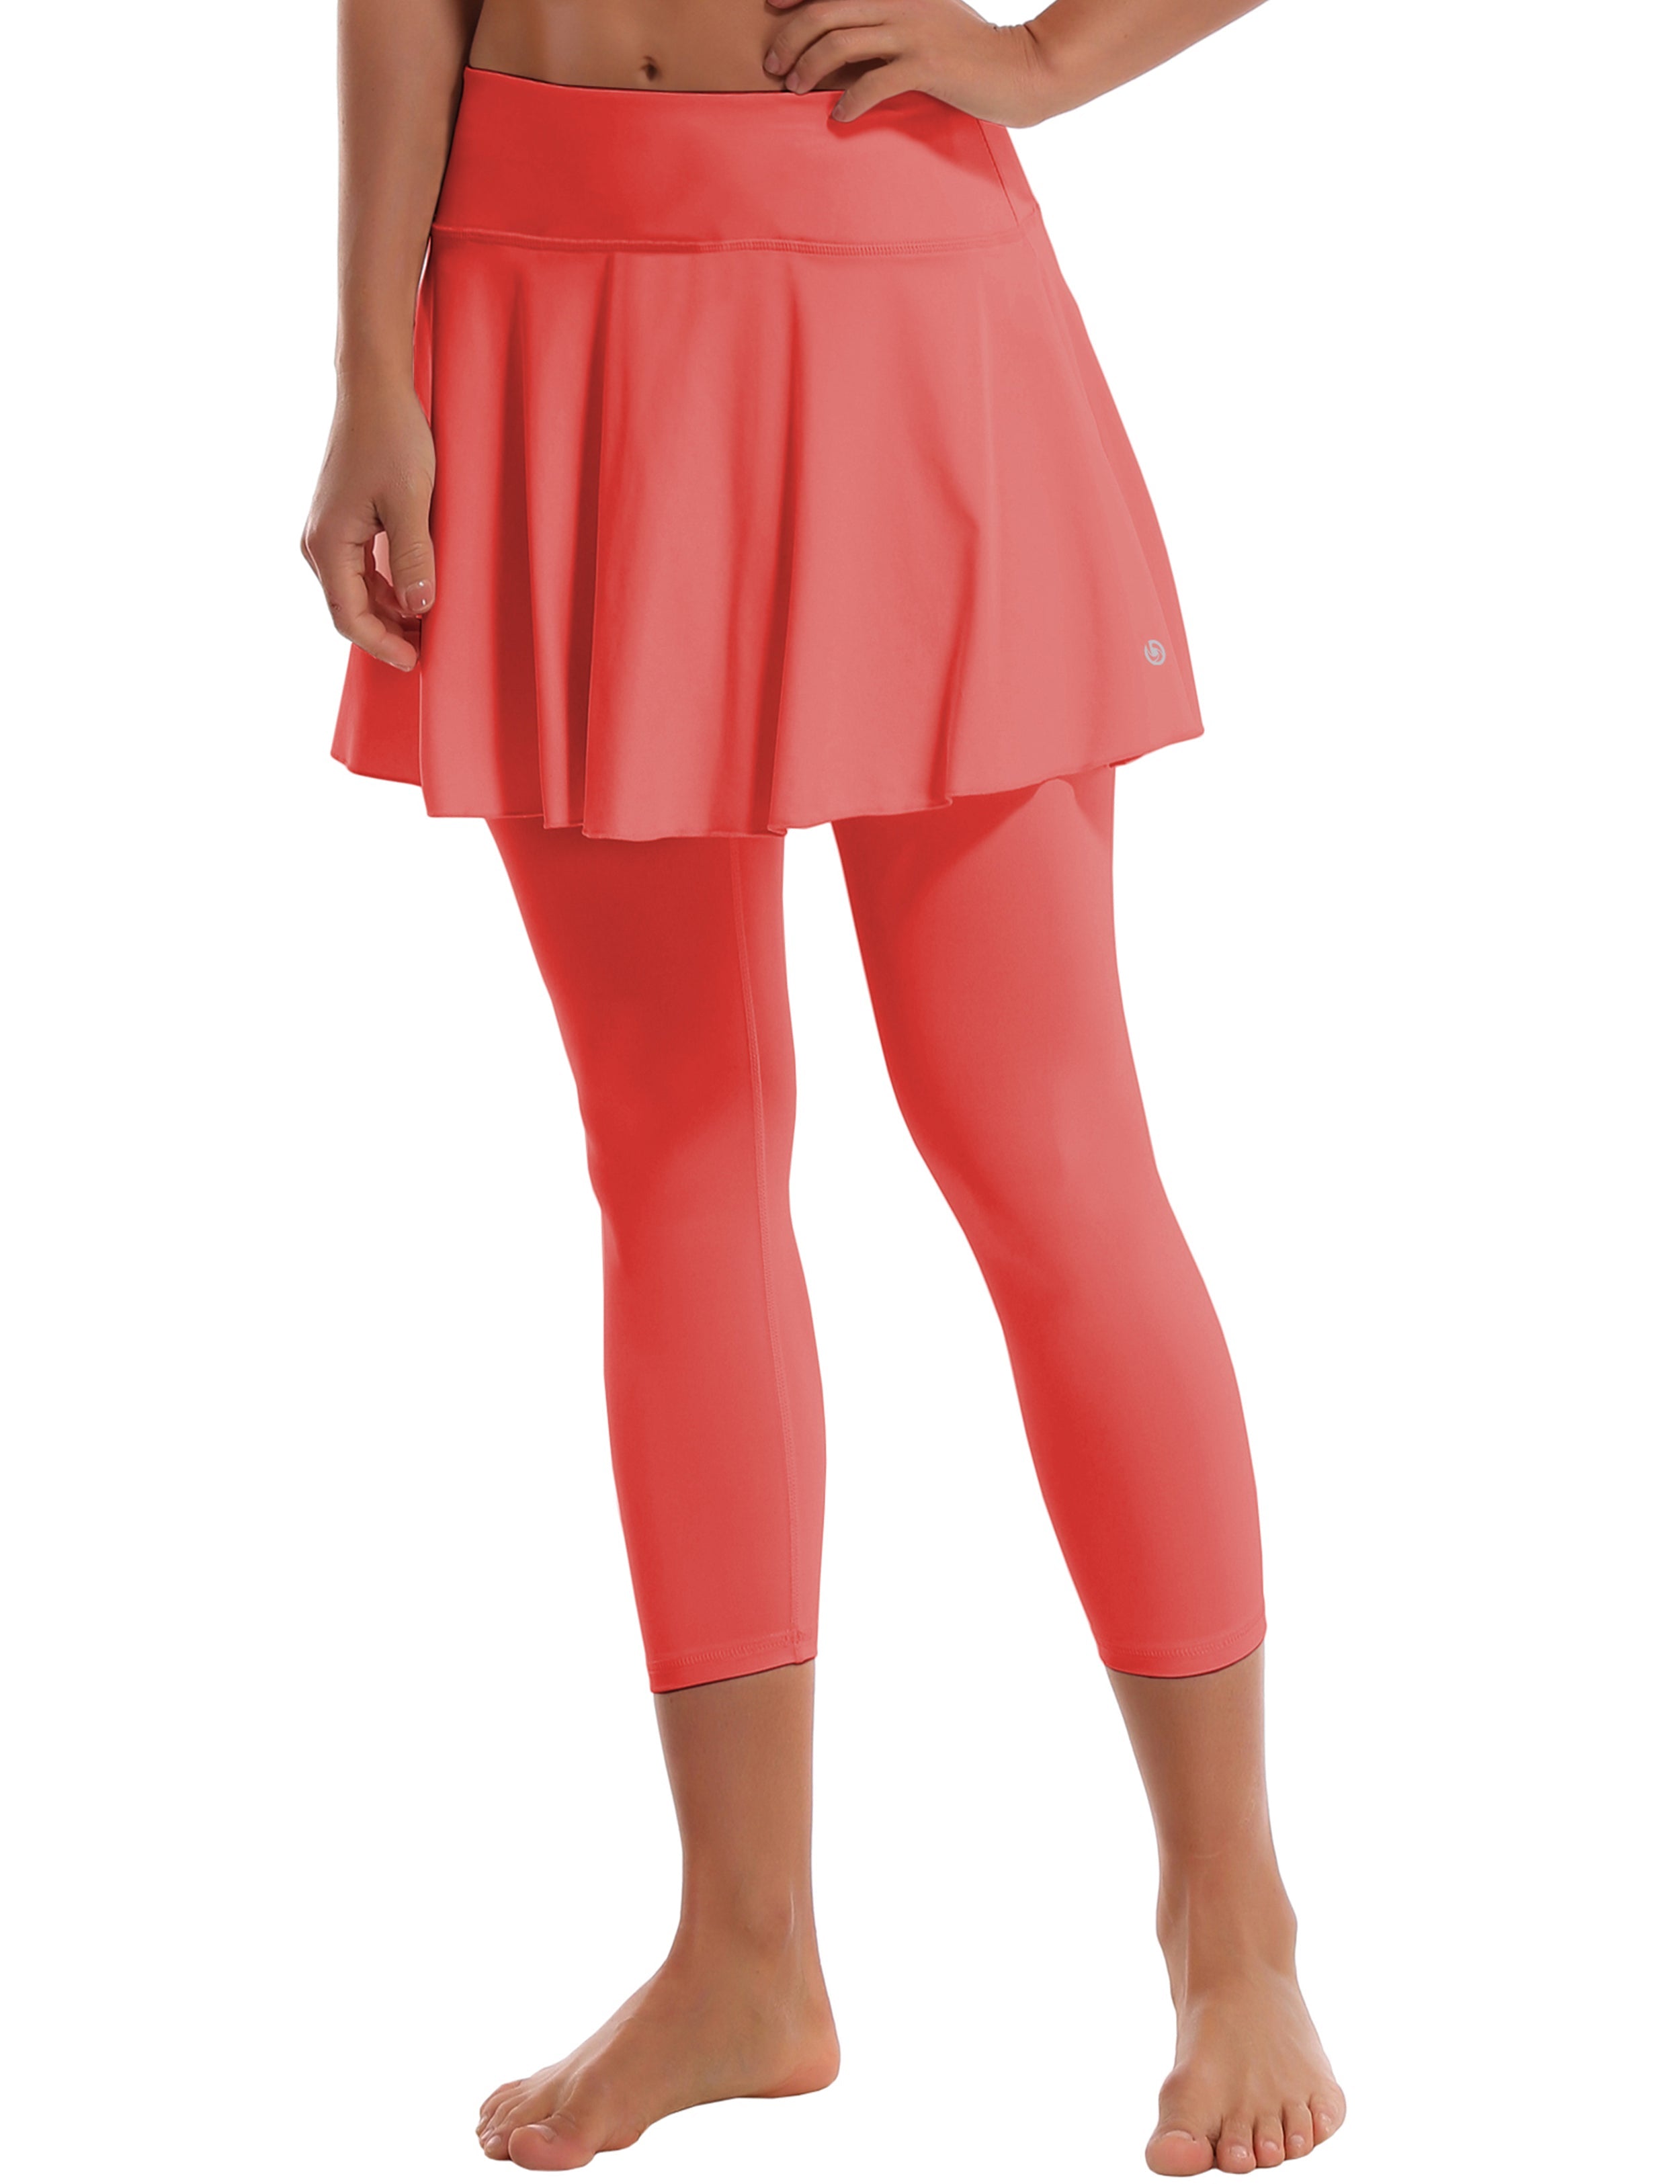 19" Capris Tennis Golf Skirted Leggings with Pockets coral 80%Nylon/20%Spandex UPF 50+ sun protection Elastic closure Lightweight, Wrinkle Moisture wicking Quick drying Secure & comfortable two layer Hidden pocket